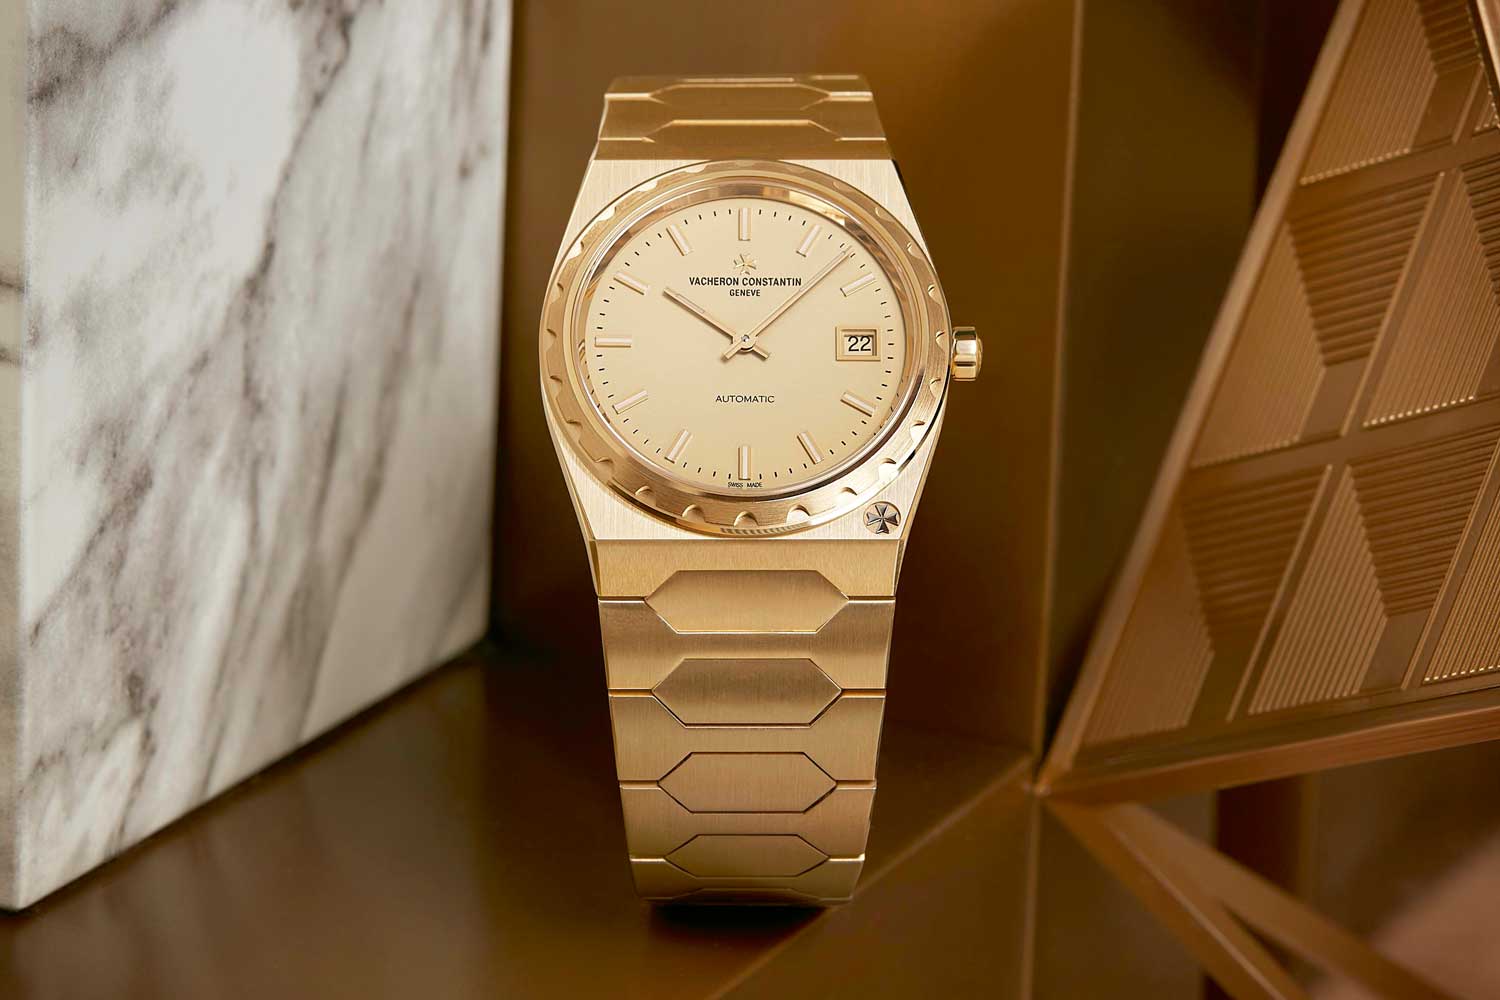 The Historiques 222, an 18K yellow gold re-edition